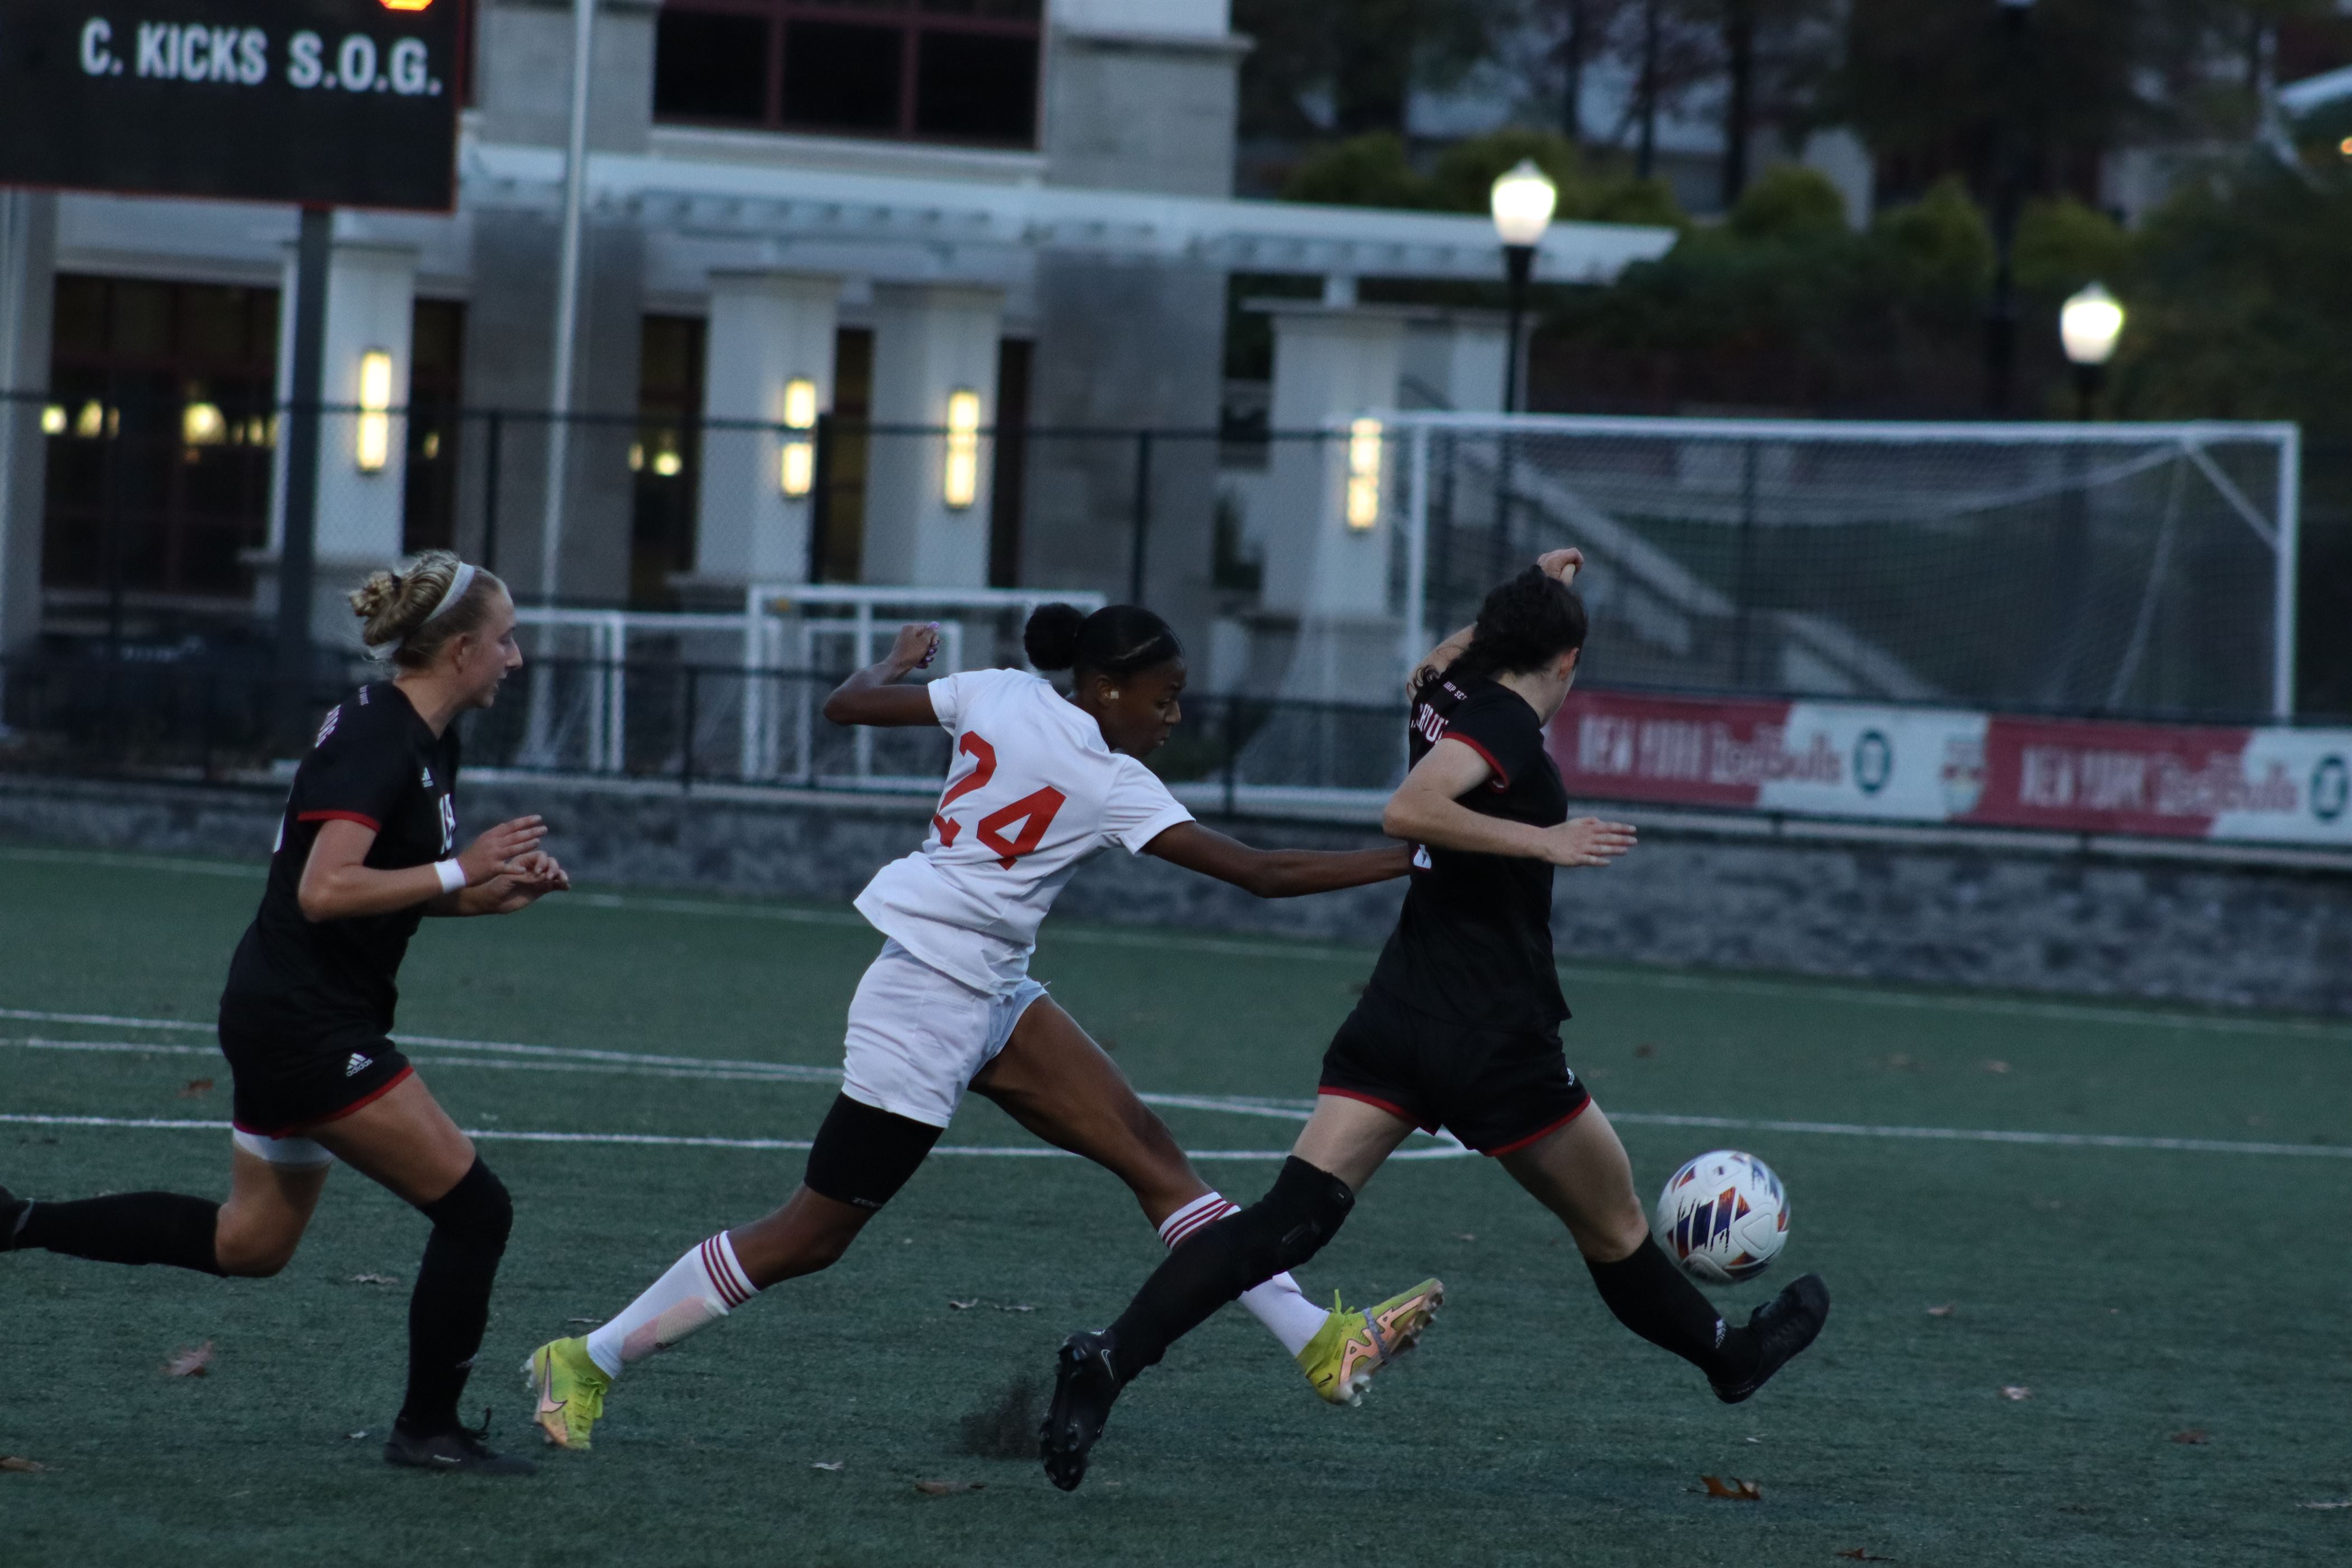 Kimberly Campbell attempts to steal the ball from a Lynchburg player. Trevor Giesberg | The Montclarion